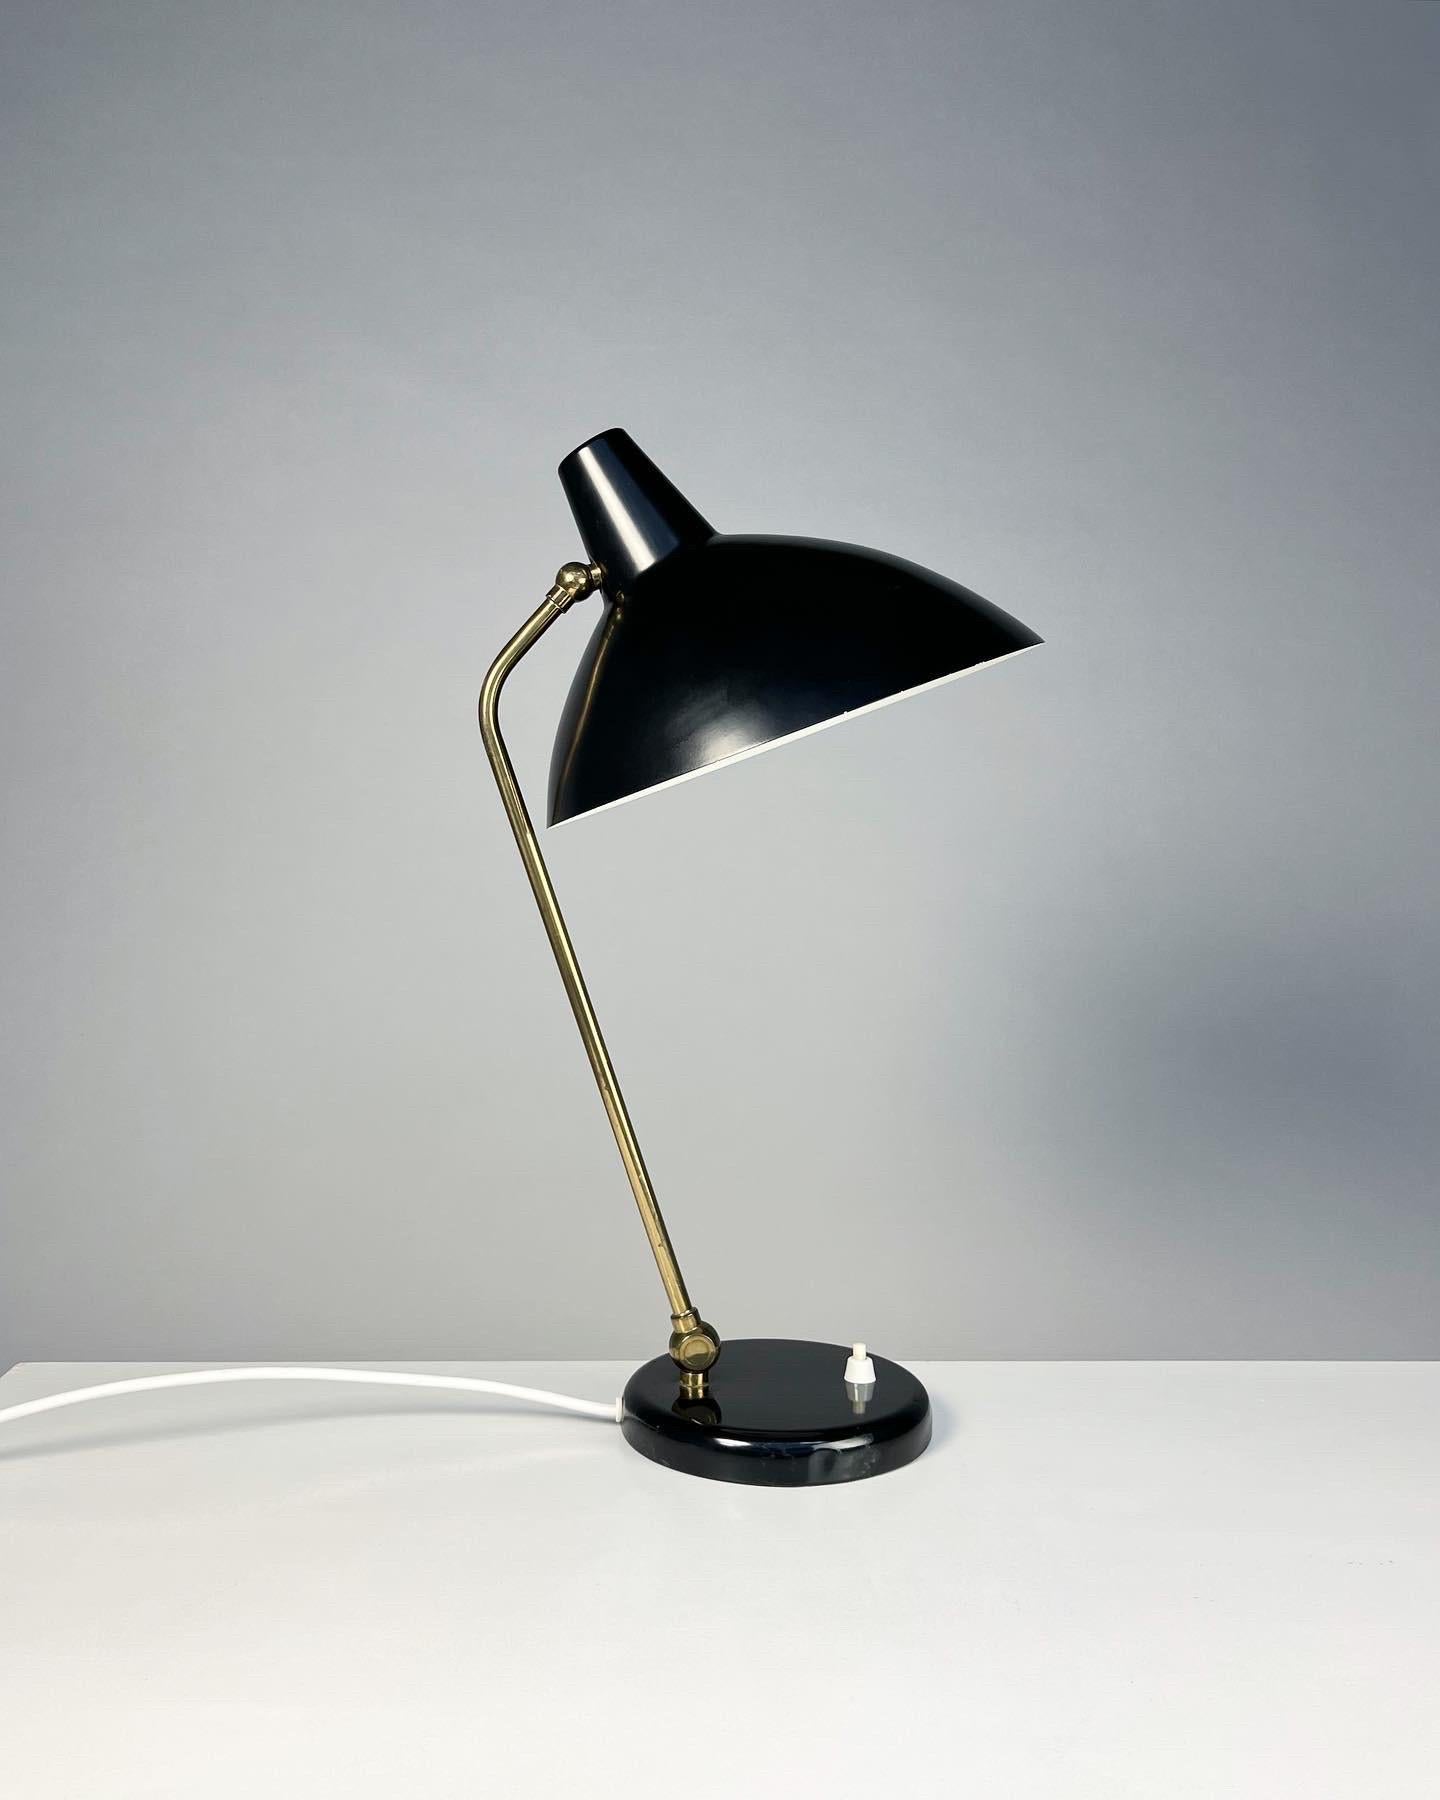 Desk lamp designed by Alfred Müller in the 1940s, model ‚Adria’ for AMBA (Alfred Müller BAsel), manufactured in Basel, Switzerland in the 1950s. 

Known for its sophisticated joints this lamp can be adjusted in various positions, both joints can